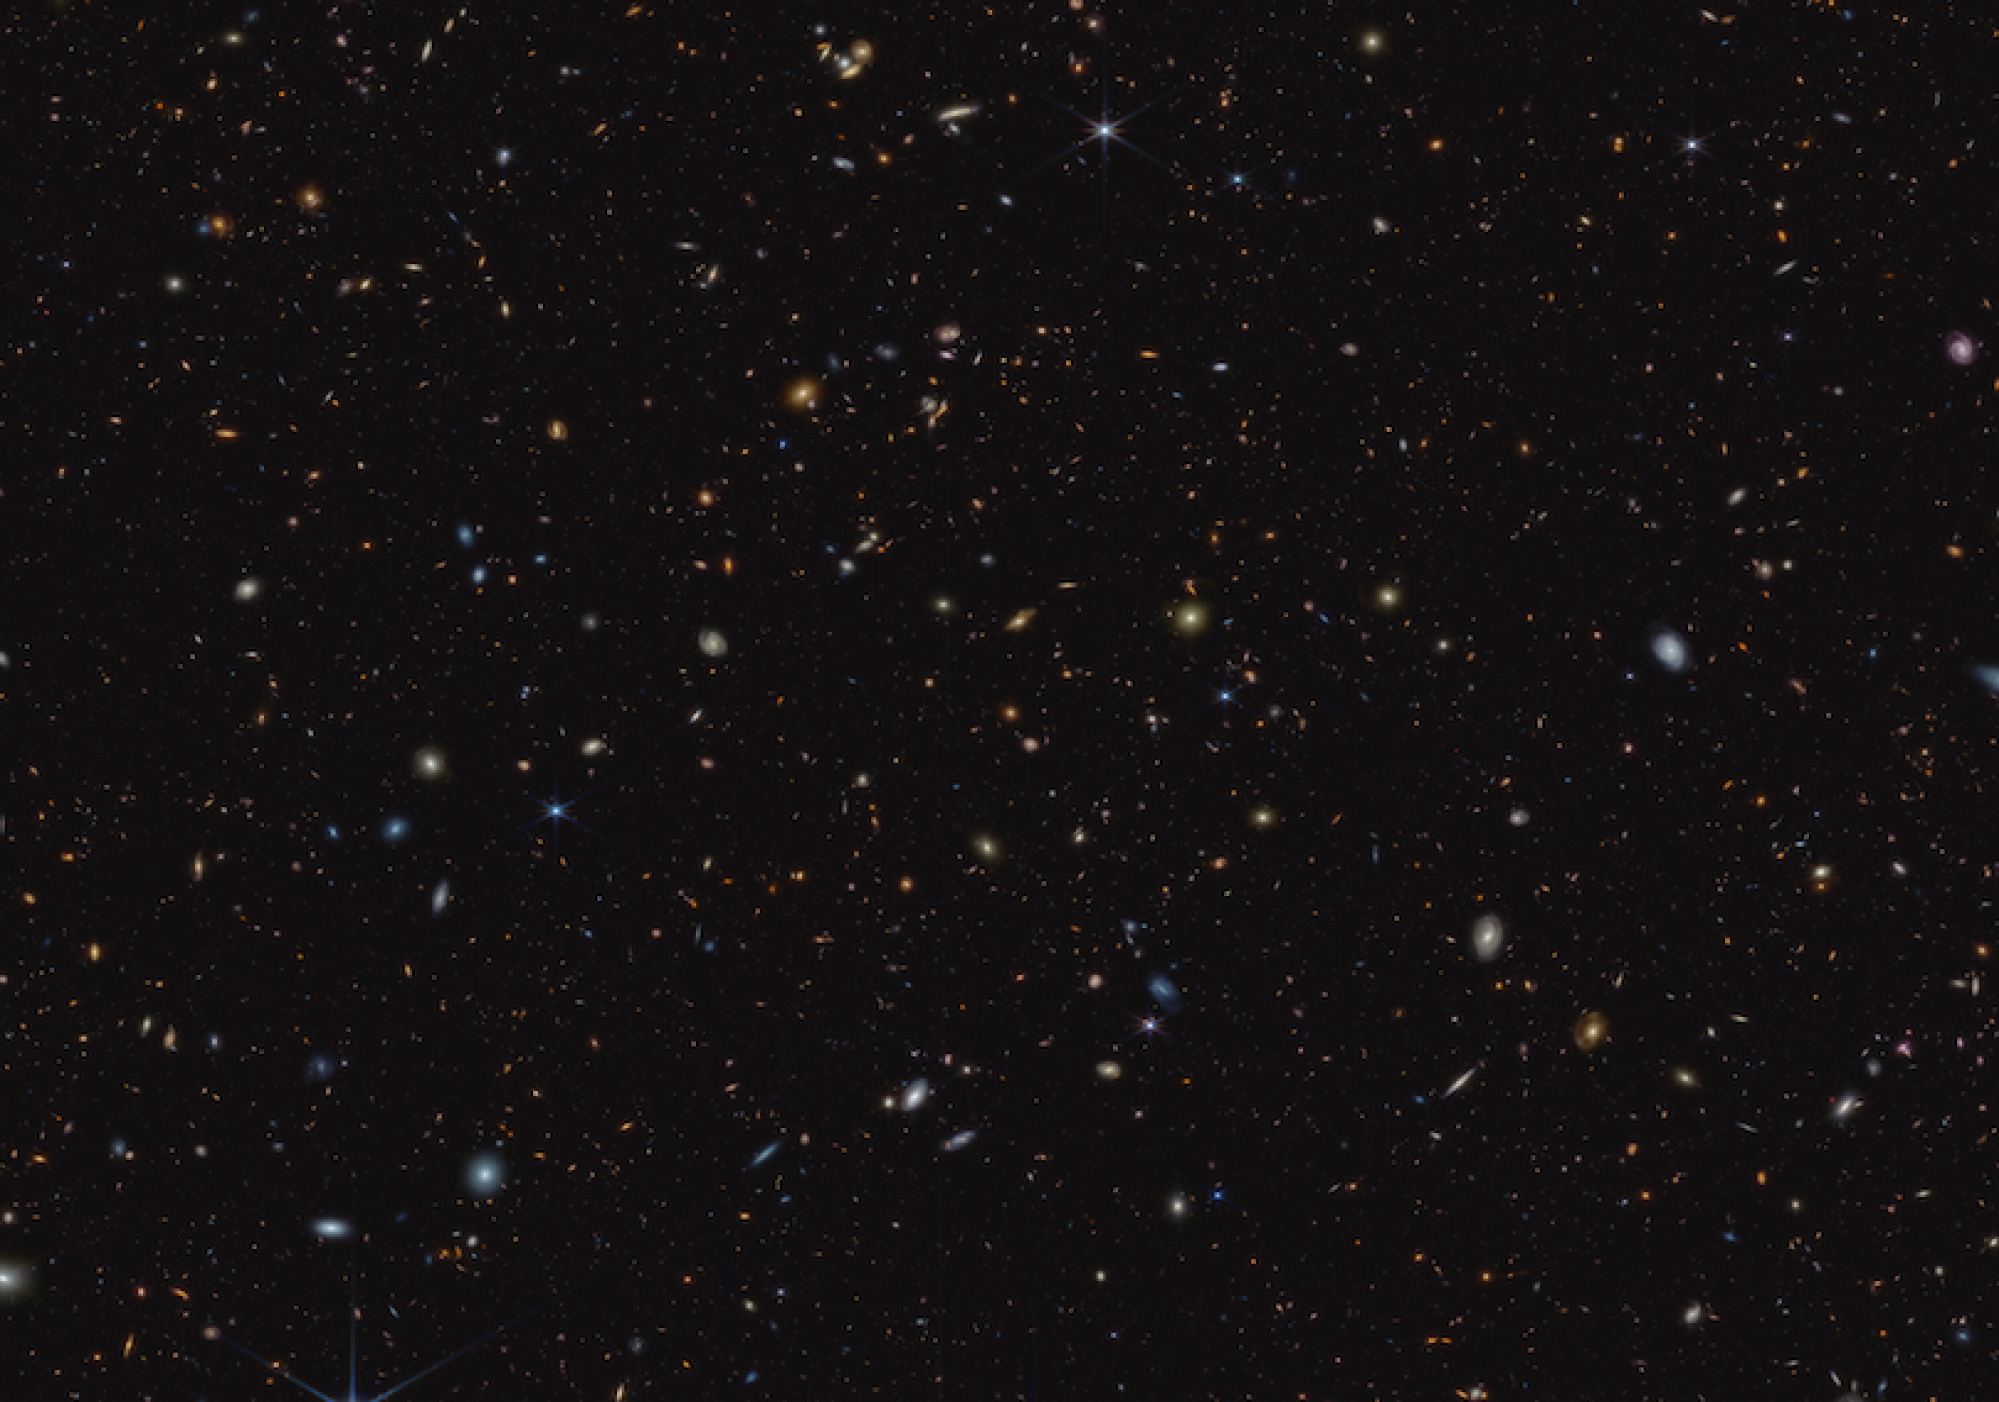 Thousands and thousands of galaxies.